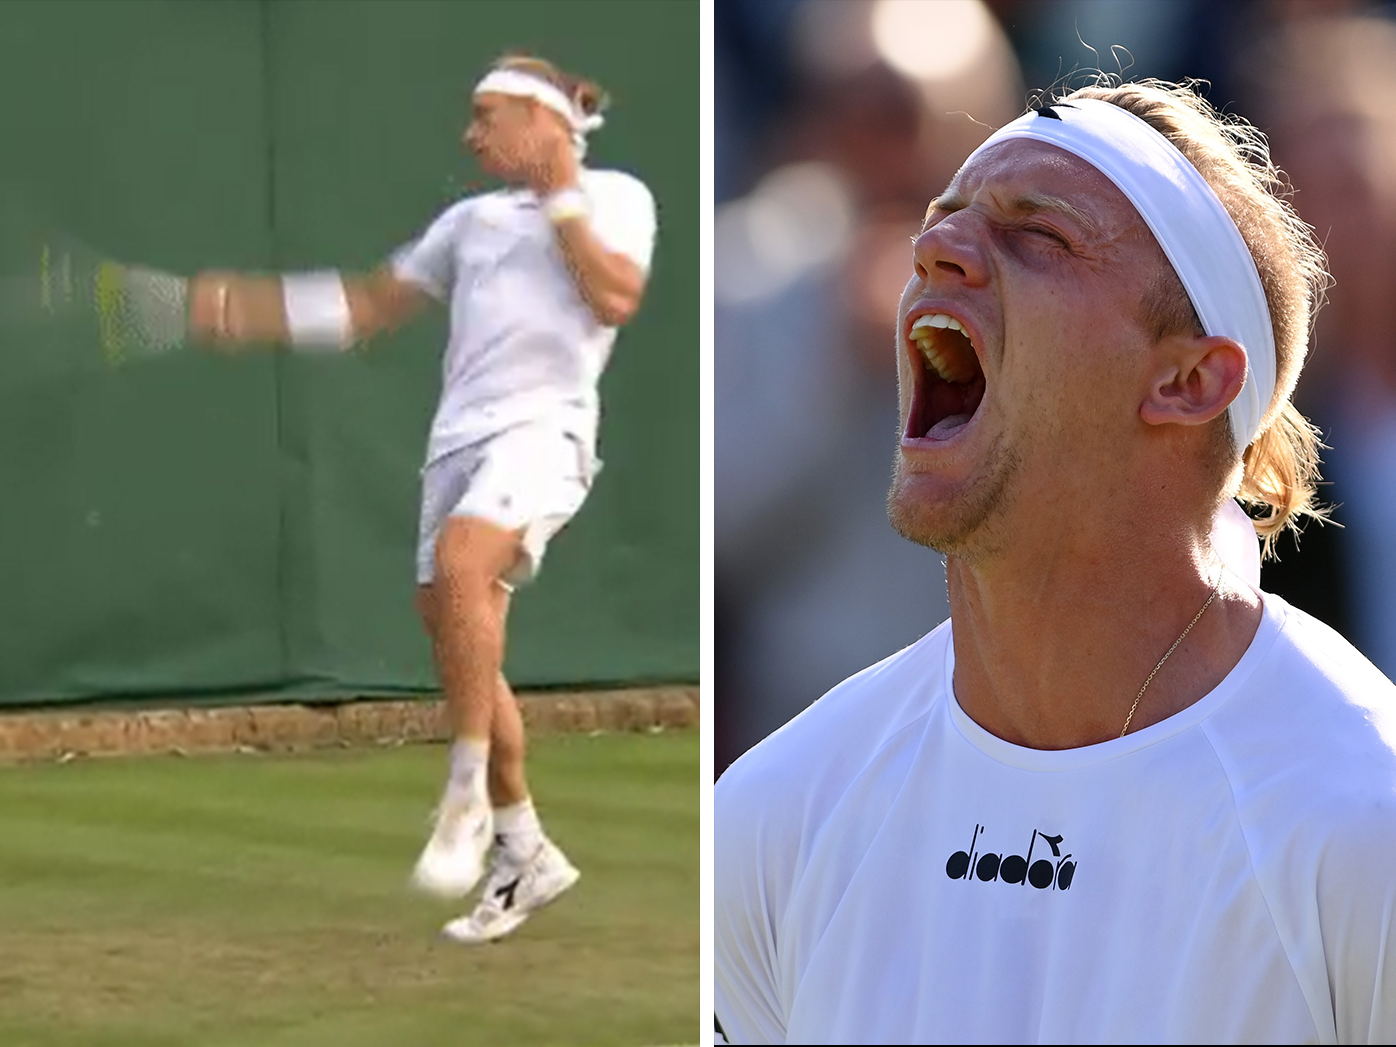 Wimbledon 2022 Spanish player Alejandro Davidovich Fokina booted from Wimbledon after receiving point penalty on match point against Jiri Vesely